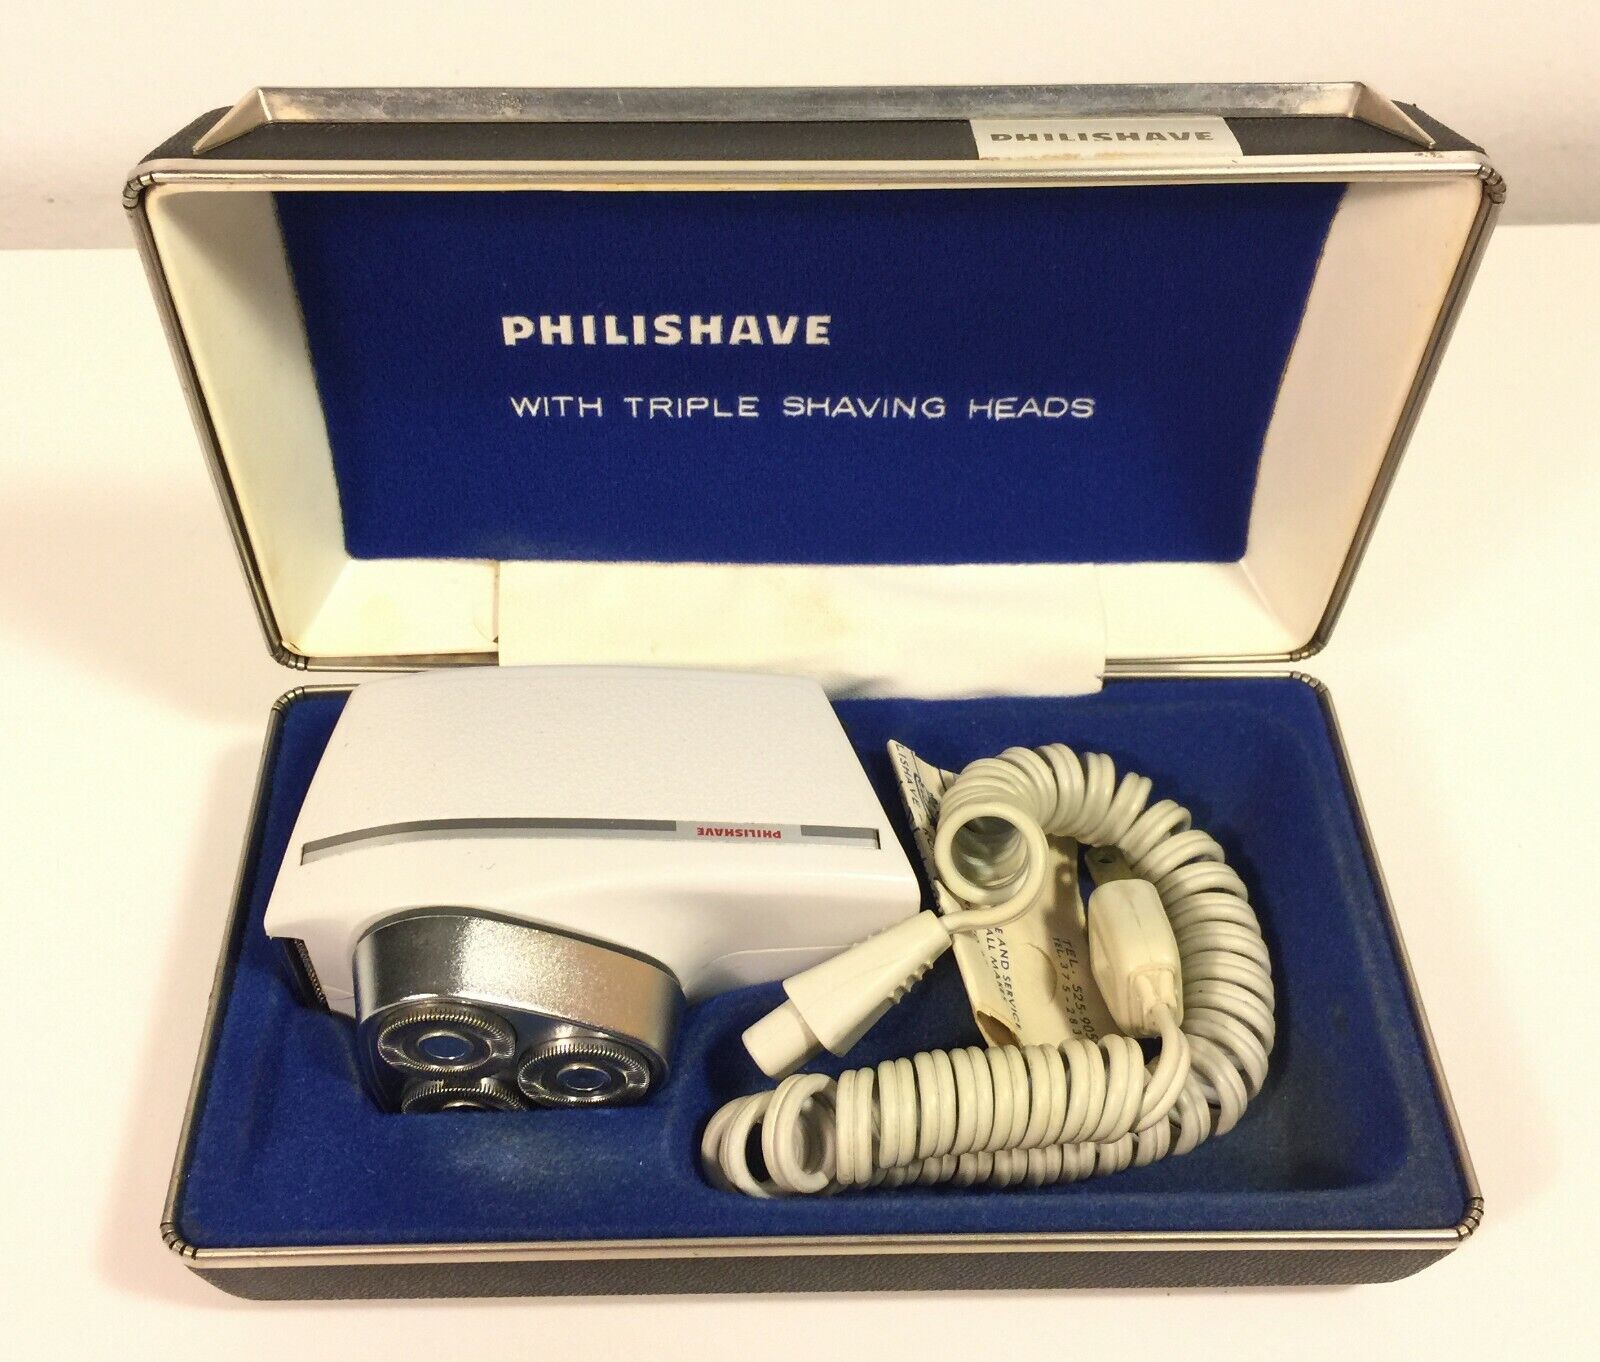 Vintage Philishave with Triple Shaving Heads - Philips Type SC 8130